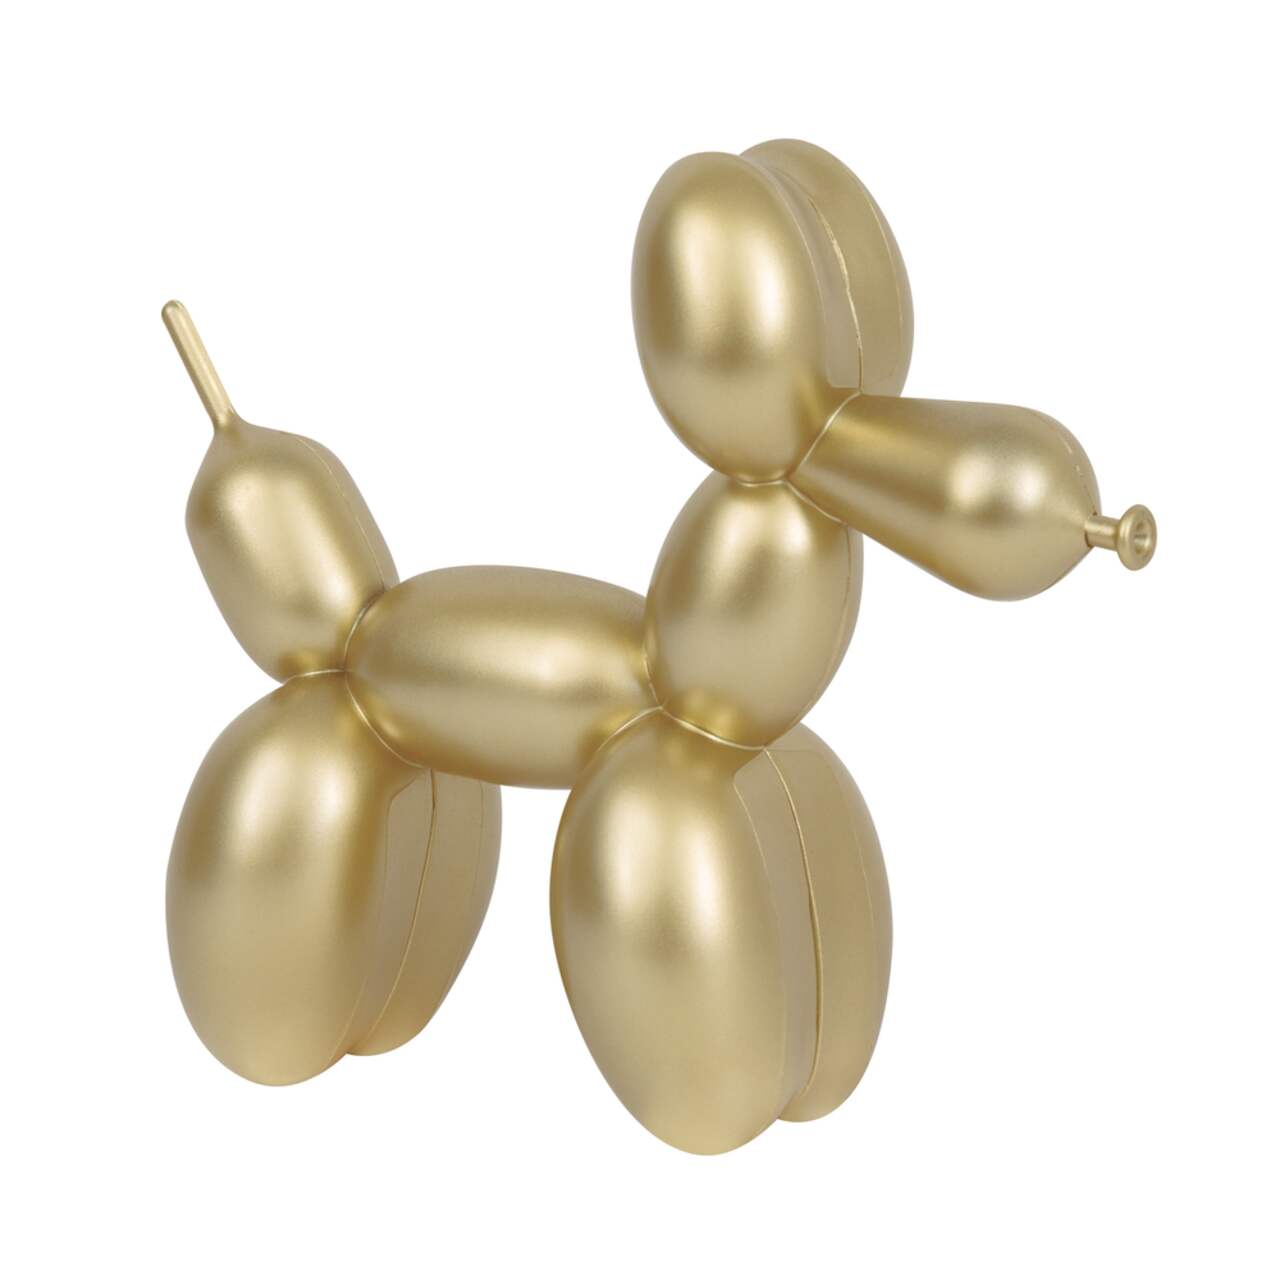 Dog Balloon Animal Shaped Balloon Weight Accessory, Assorted Colours, 4-in,  for Birthday Party